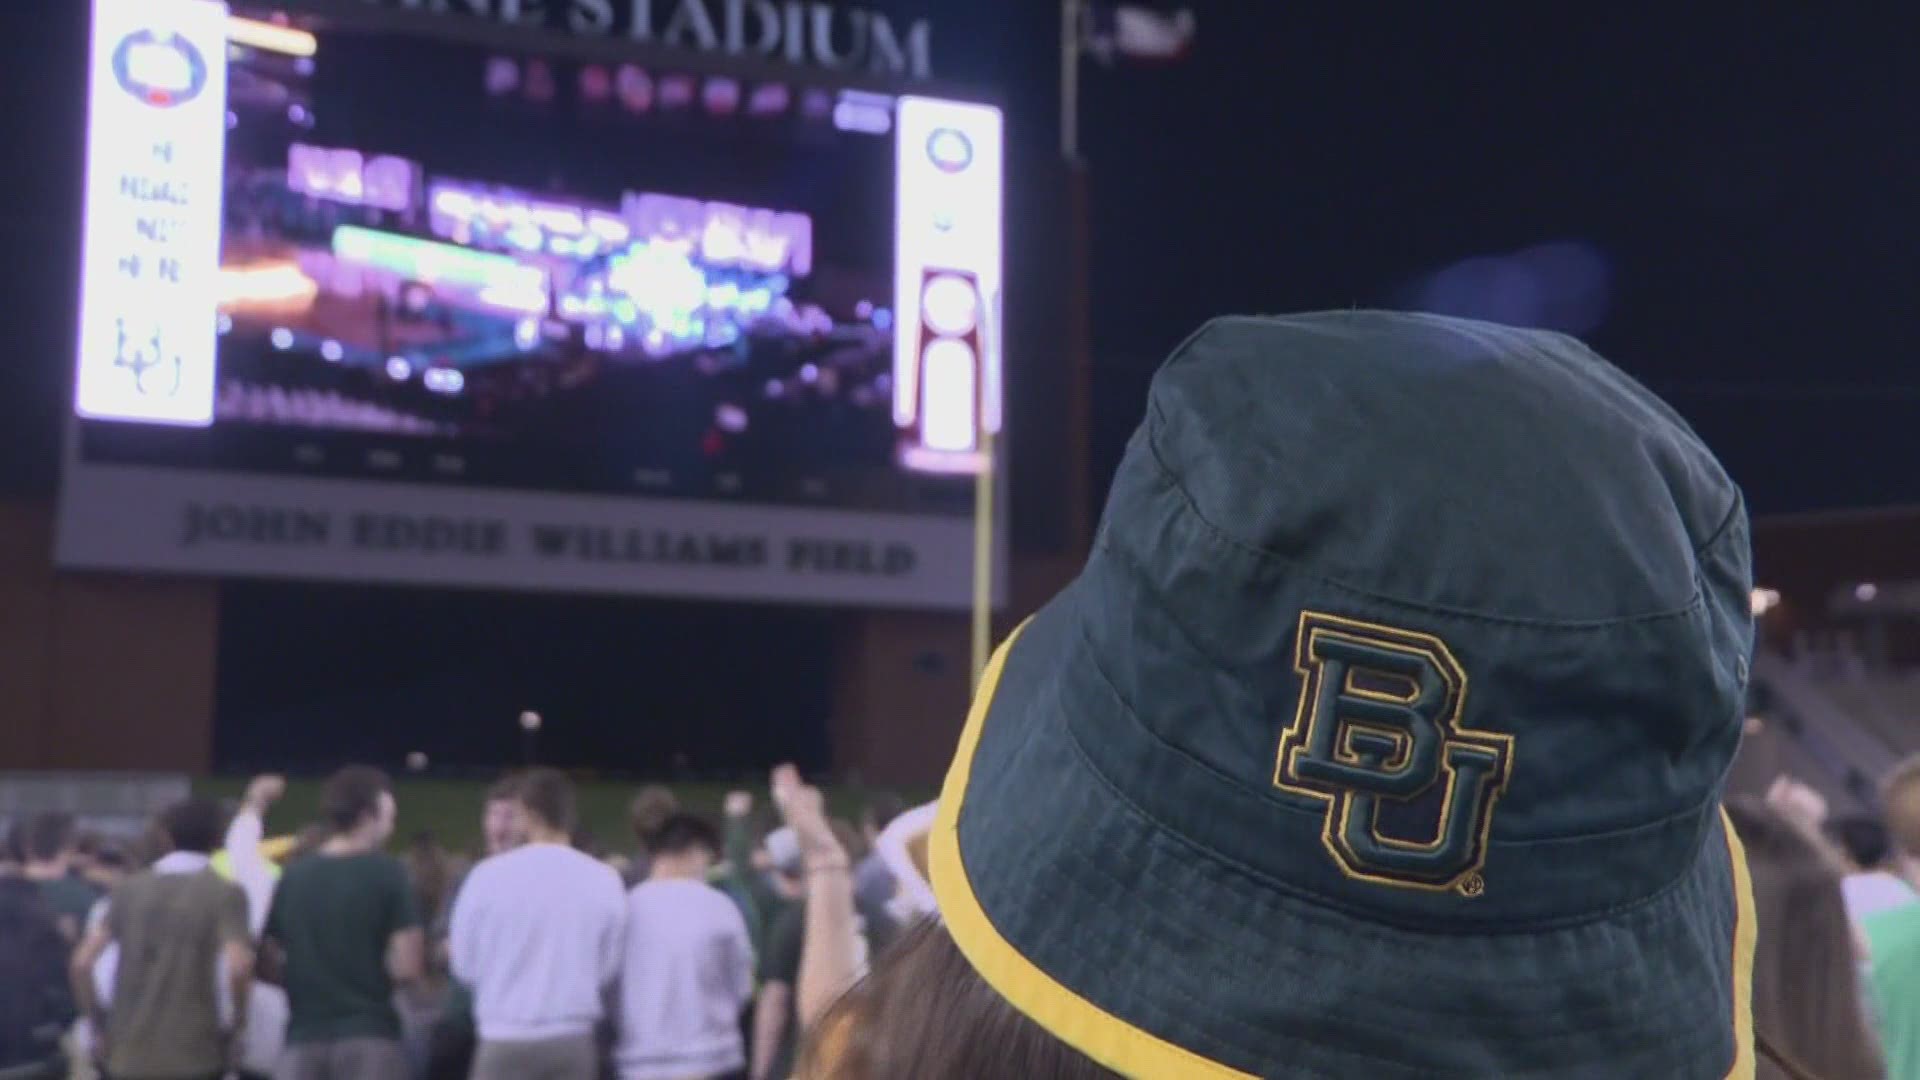 The Baylor Bears are playing for their first-ever NCAA men's basketball national championship tonight.